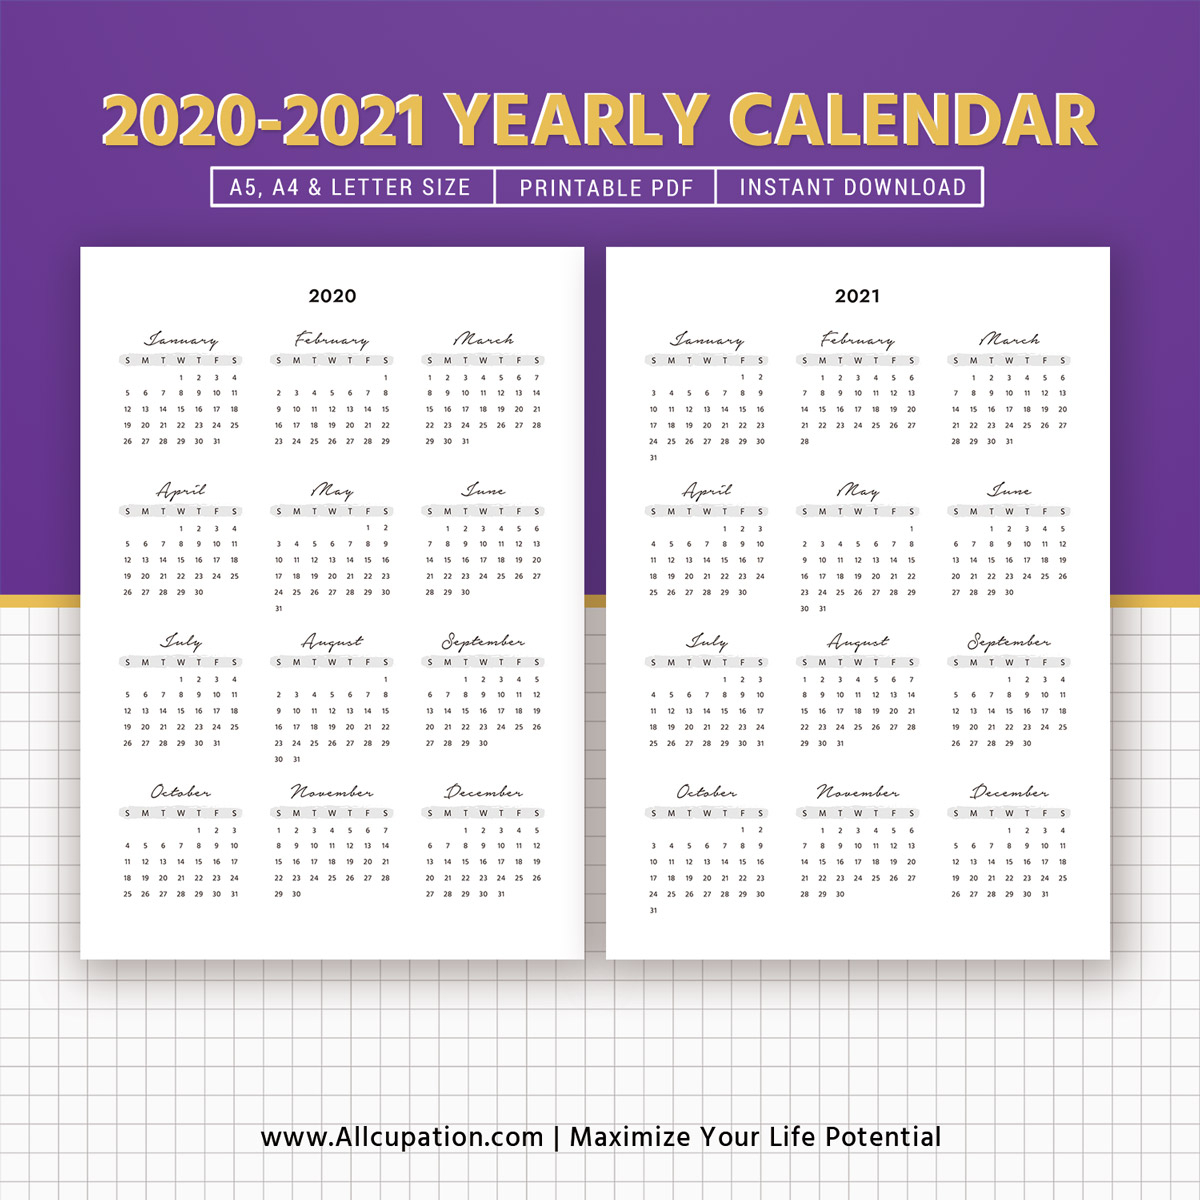 2020-2021 Yearly Calendar, Year At A Glance, Printable Calendar, Best  Planner, Planner Printable, Planner Inserts, Planner Template, Filofax A5,  A4,